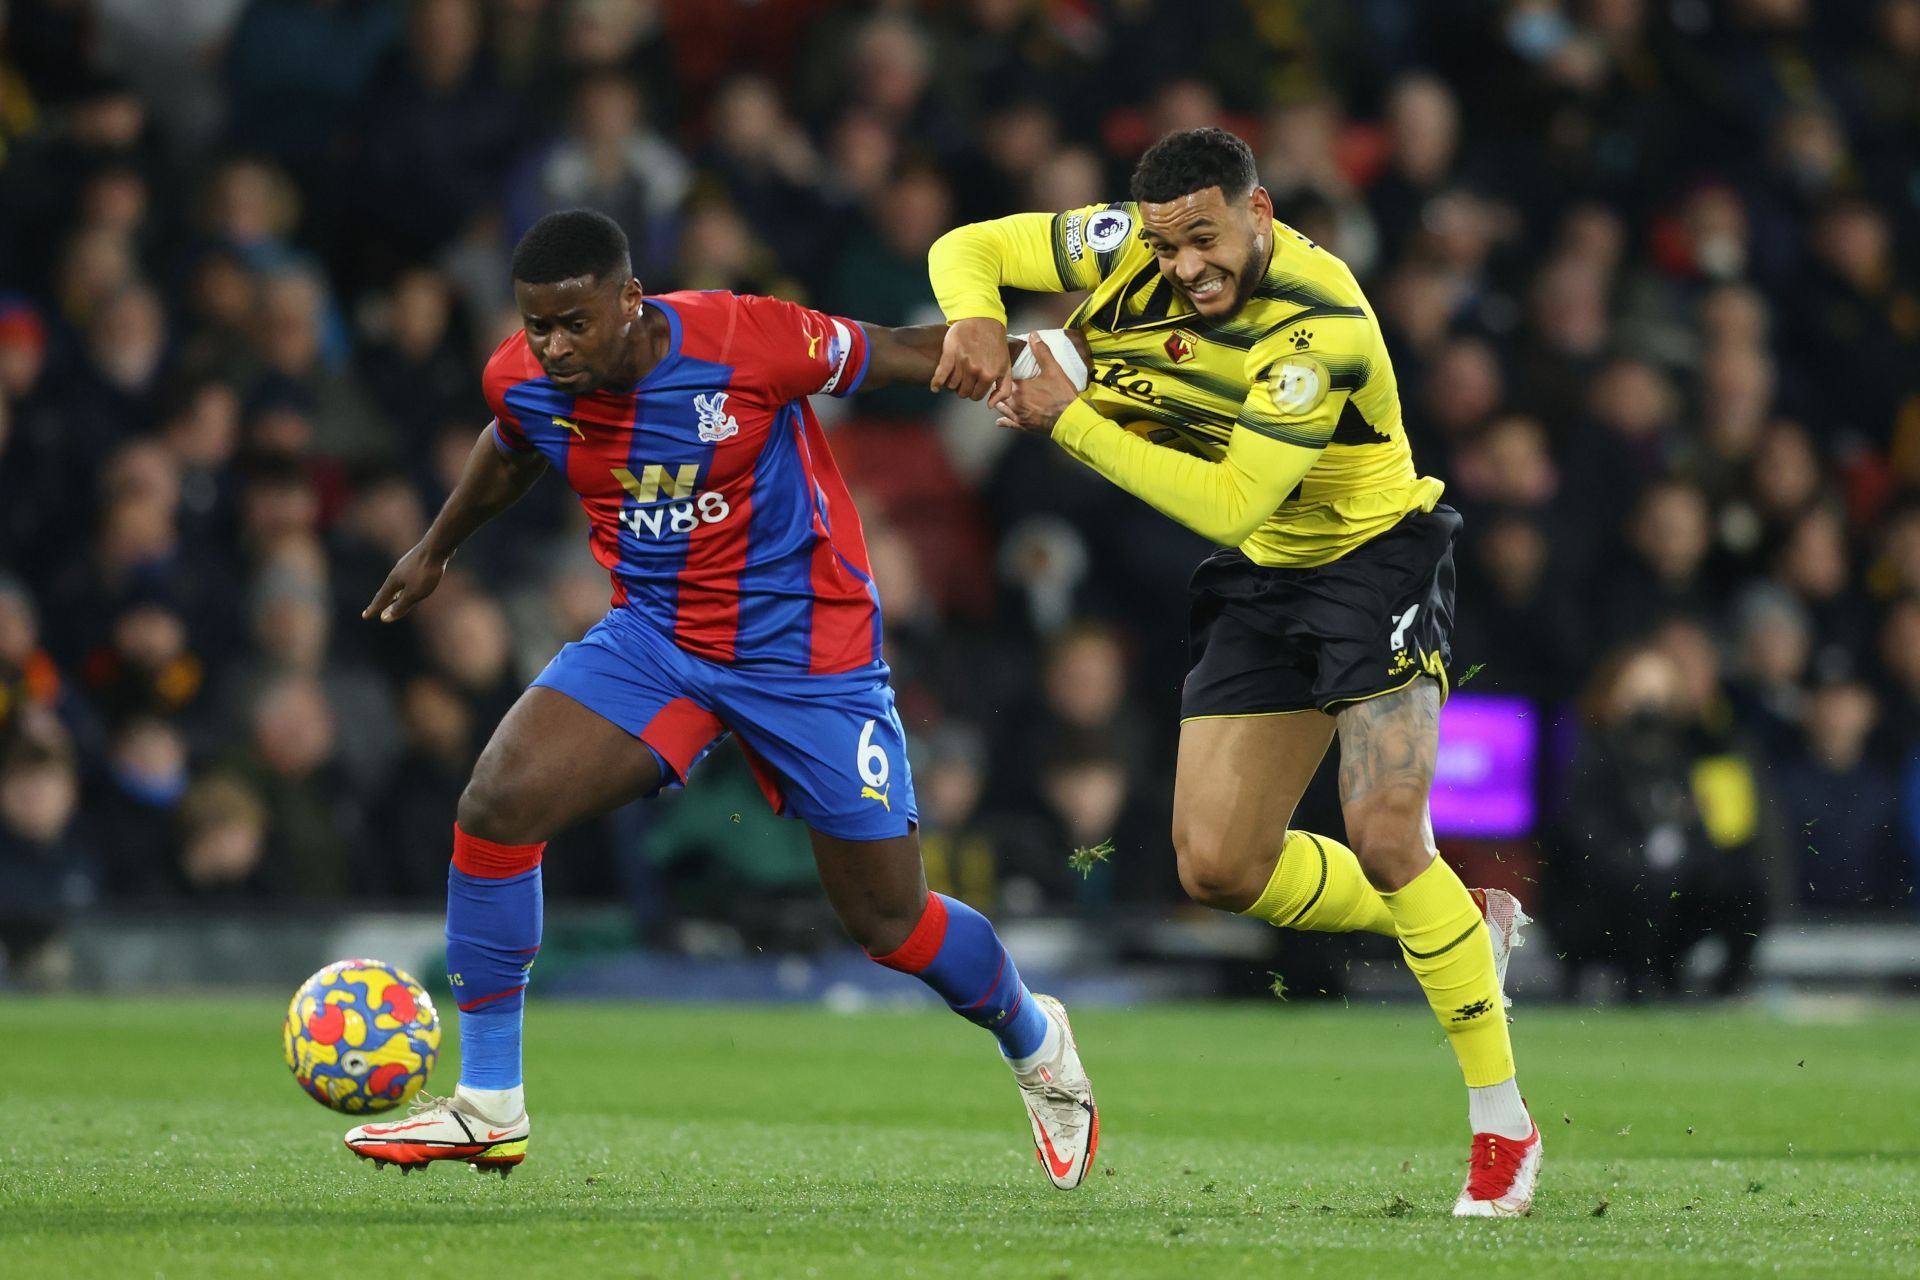 Marc Guehi has been playing for Crystal Palace this season